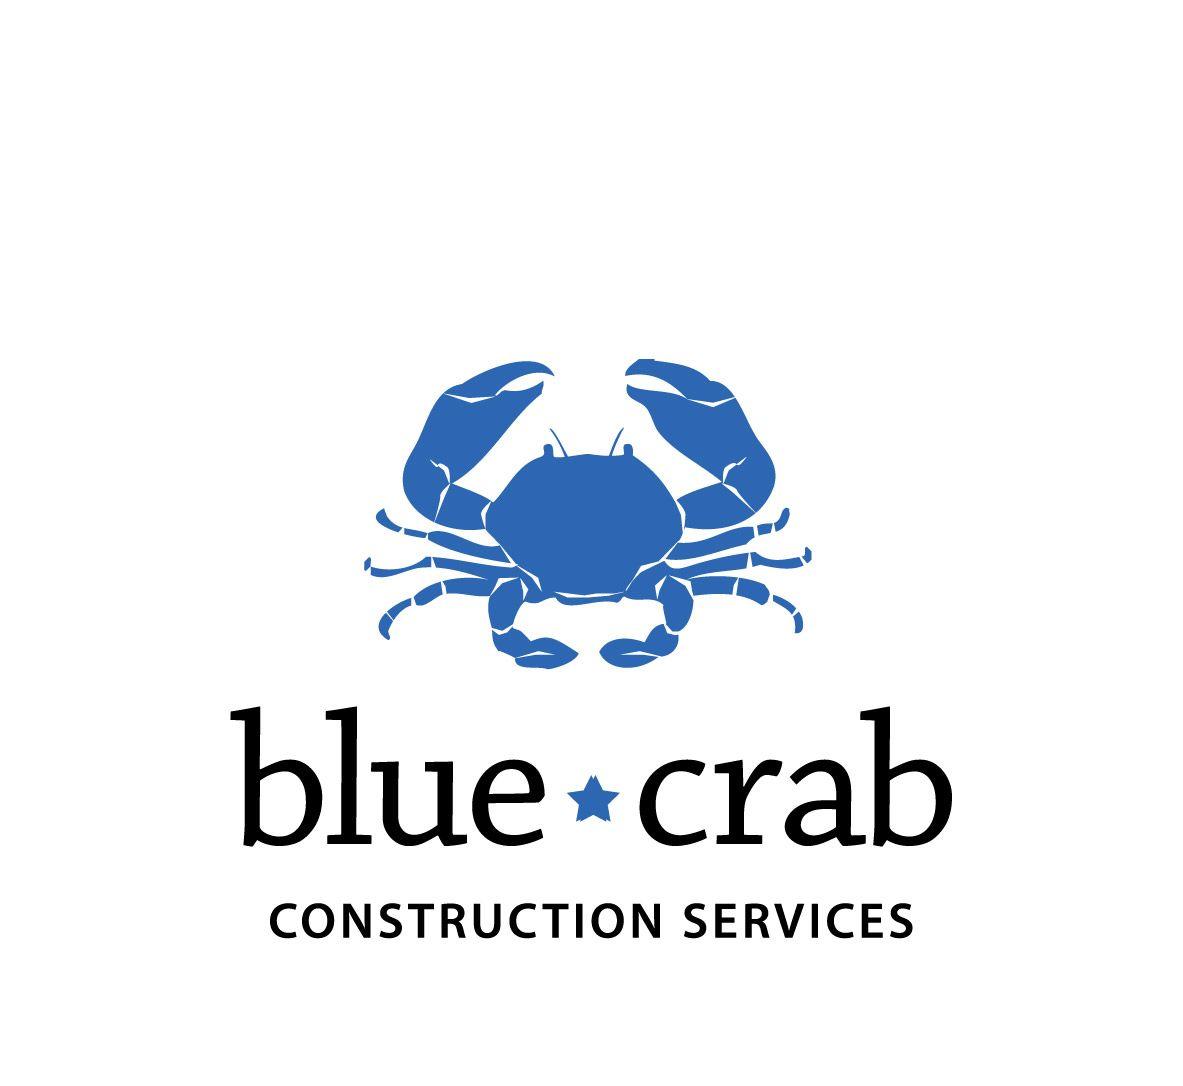 Blue Crab Logo - Serious, Traditional, Construction Logo Design for see the attached ...